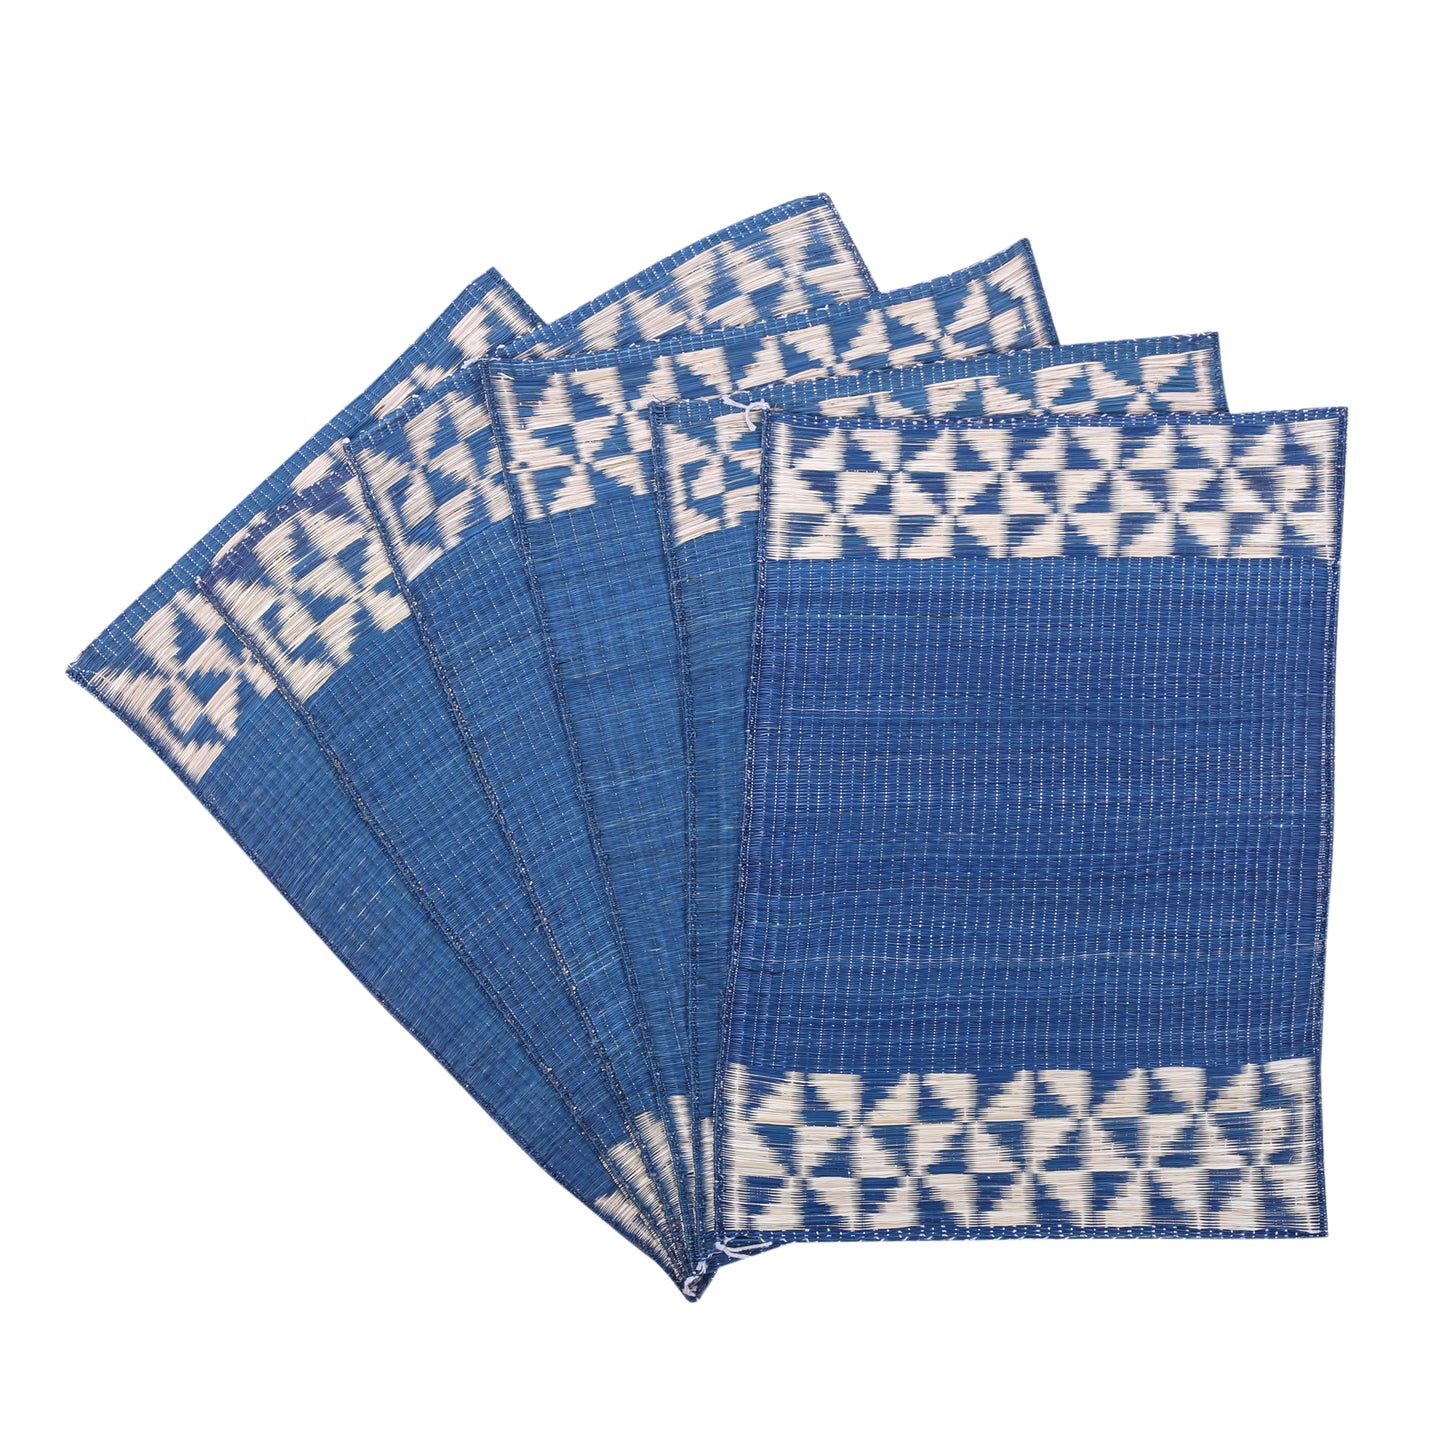 Masland Madurkathi Table Mat Set: A Superfine Premium Madurkathi Grass Handwoven Designer Dining Table Mat  Set (12×18 inches) with Runner(12×49 inches) Heat Resistant Eco-friendly Placemat with natural Border-MTM-07